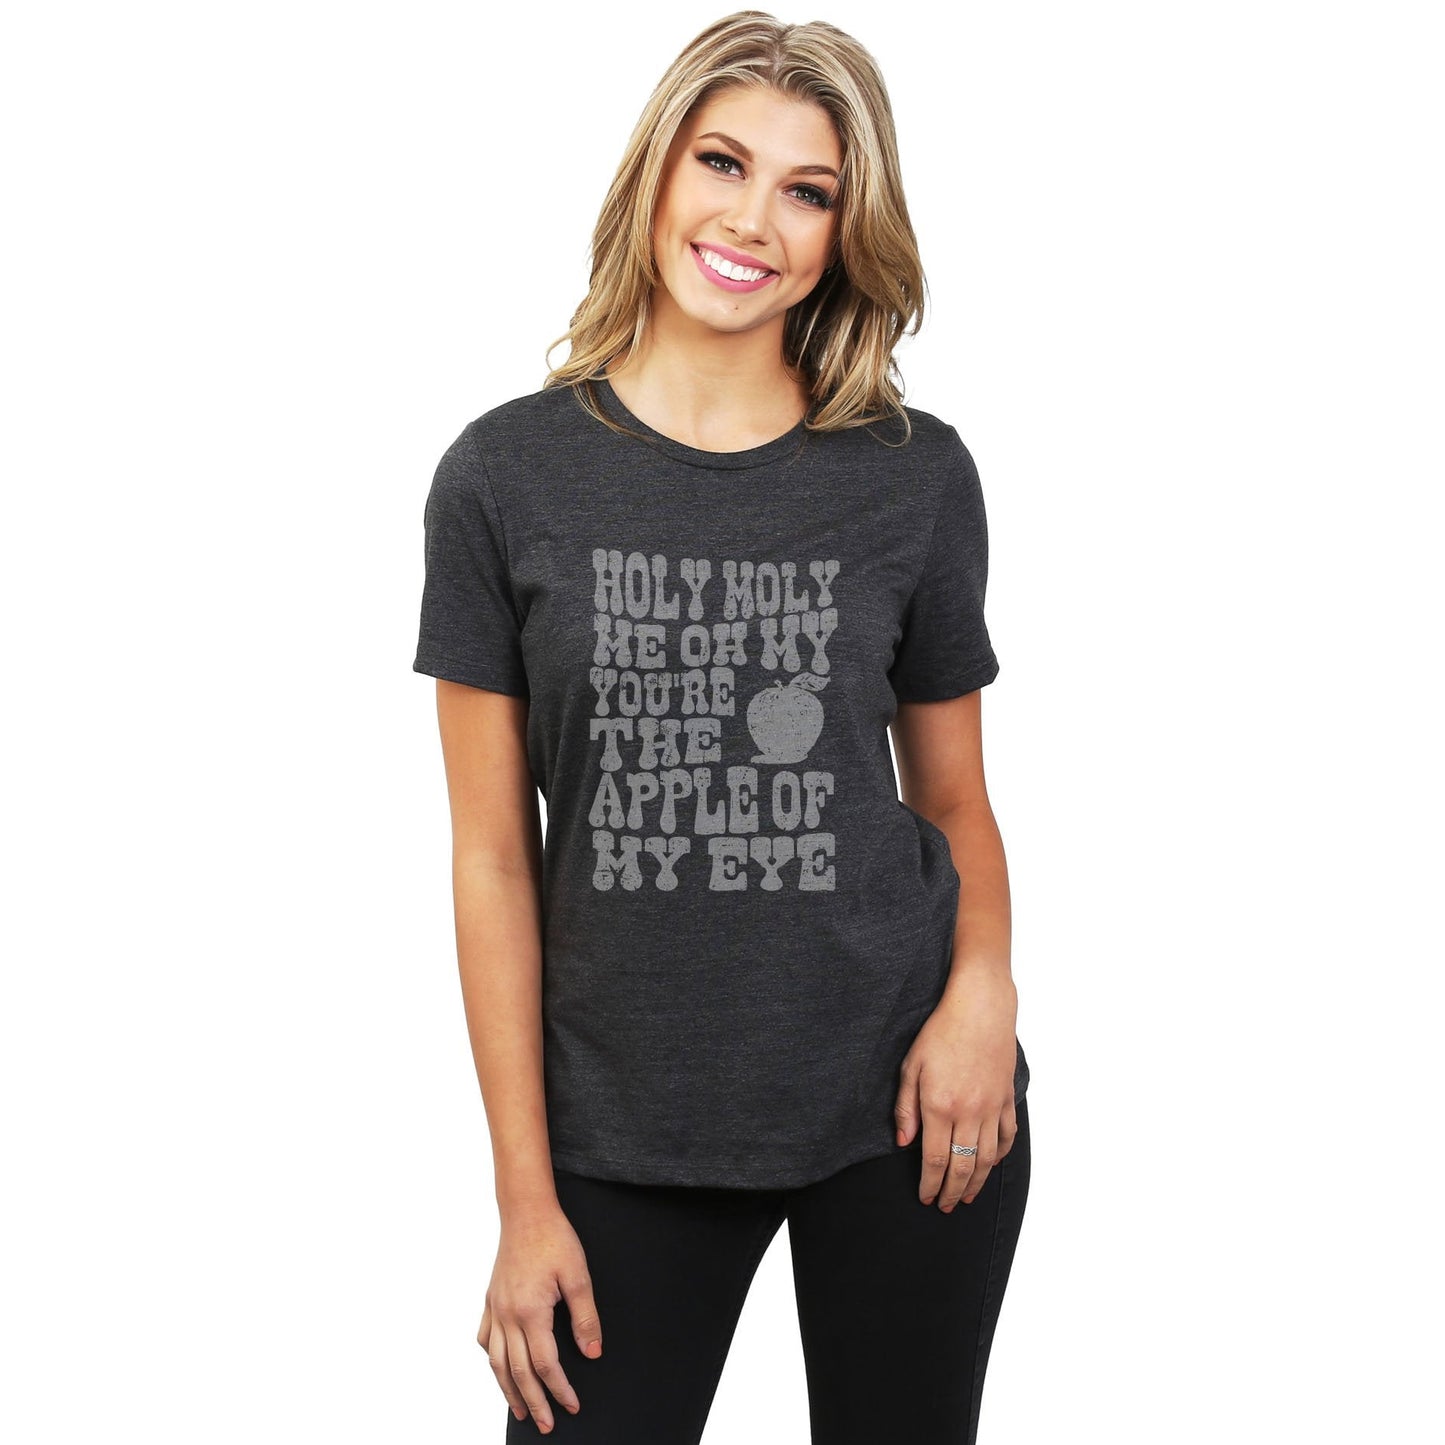 Holy Moly Me Oh My You're The Apple Of My Eye Women's Relaxed Crewneck T-Shirt Top Tee Charcoal Grey Model